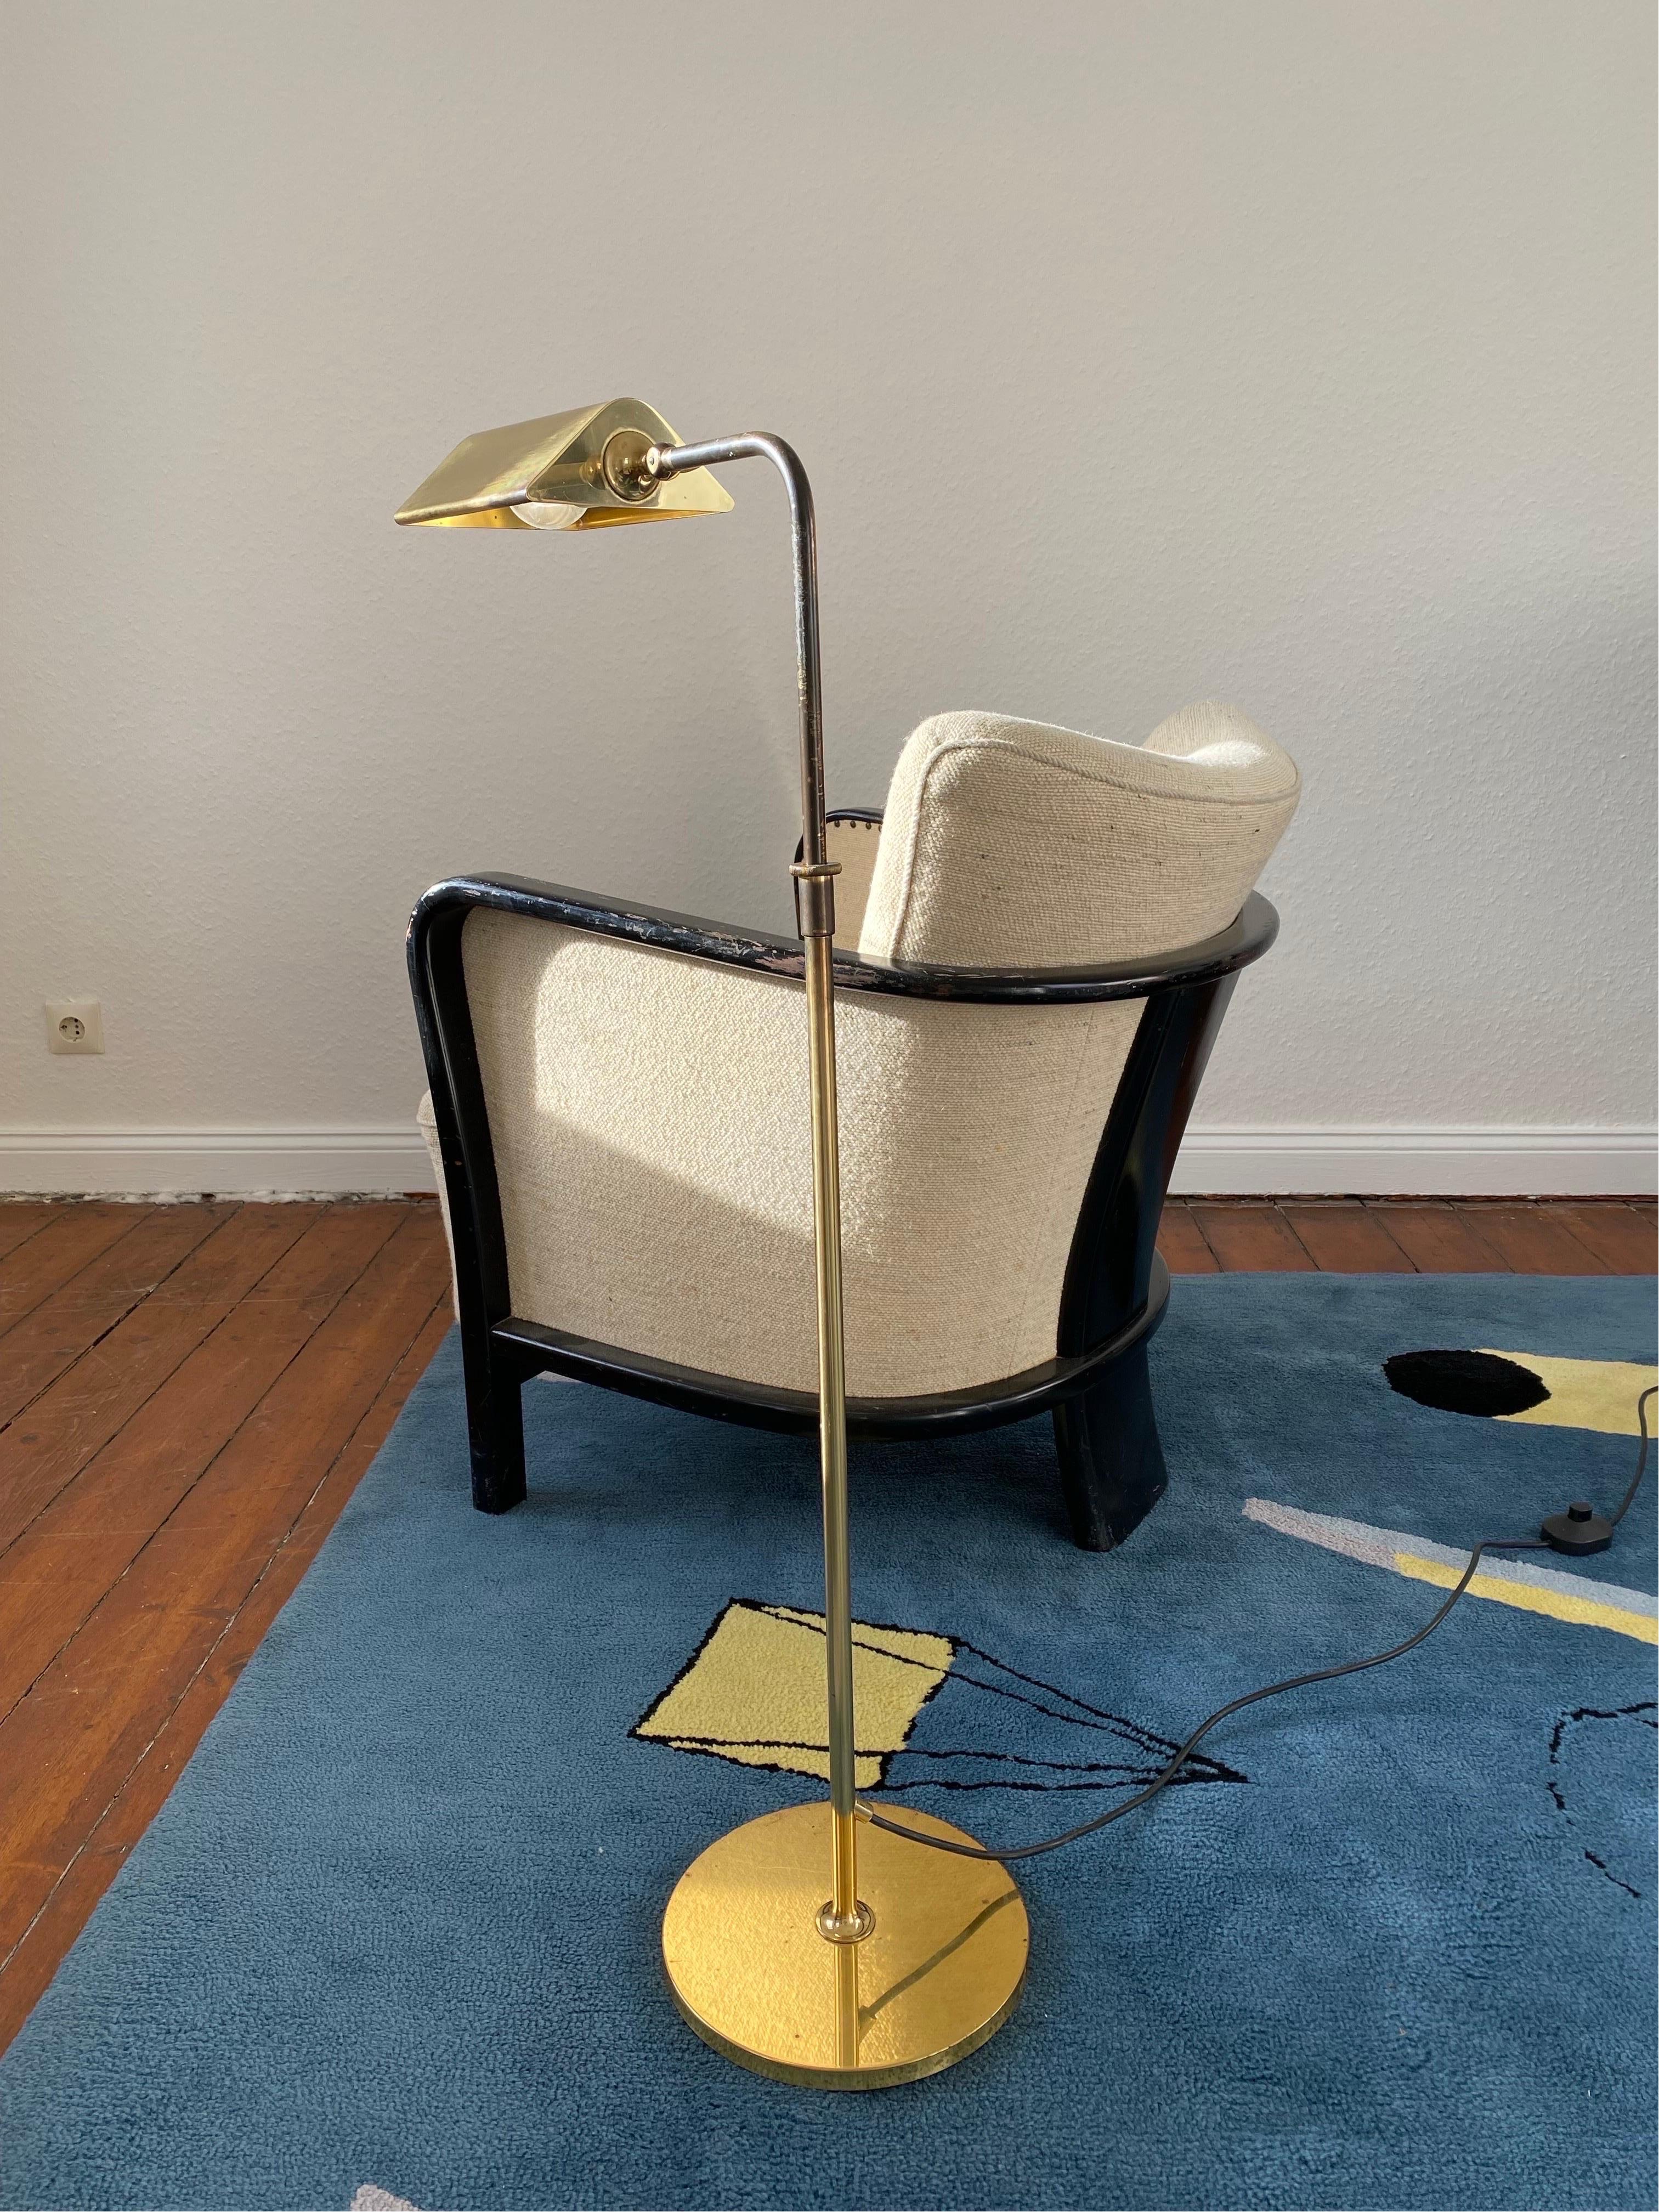 An Adjustable Brass 1970s high quality reading floor lamp ,model : Cervantes by Florian Schulz,Germany.

With its beautiful partly bronzed patinated finish this adjustable lamp has a height from 85 cm to 135 cm max .
Also the light direction can